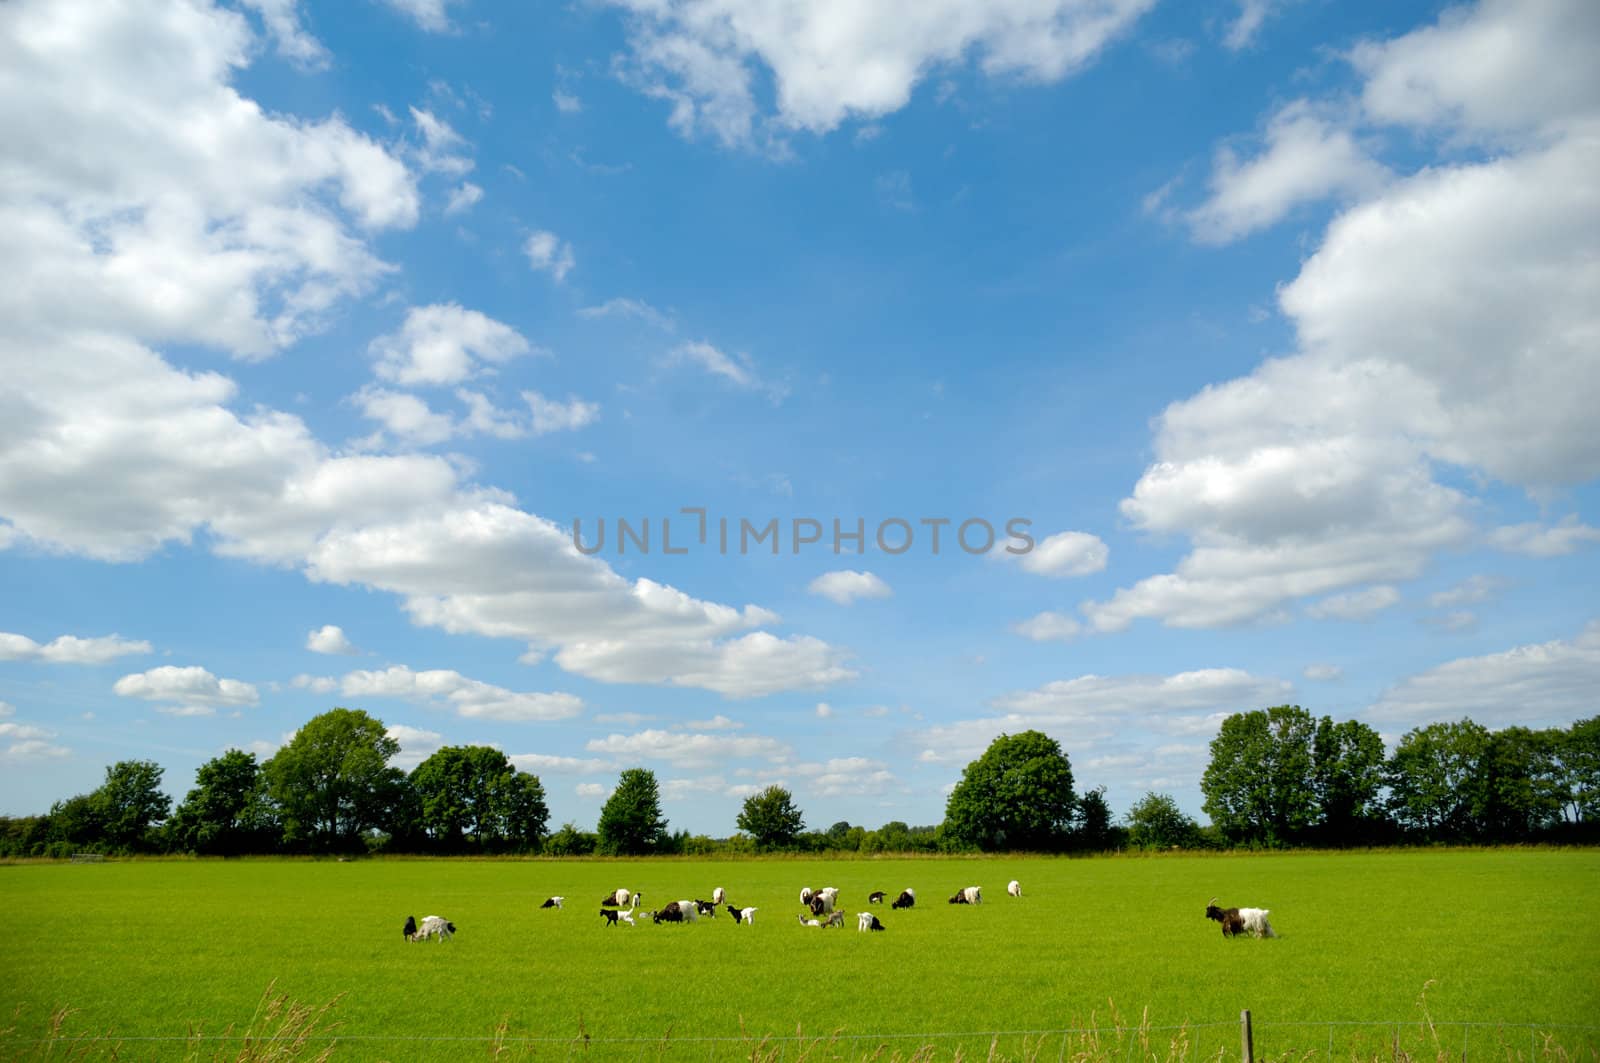 A green field with many goats. The sky is blue with clouds